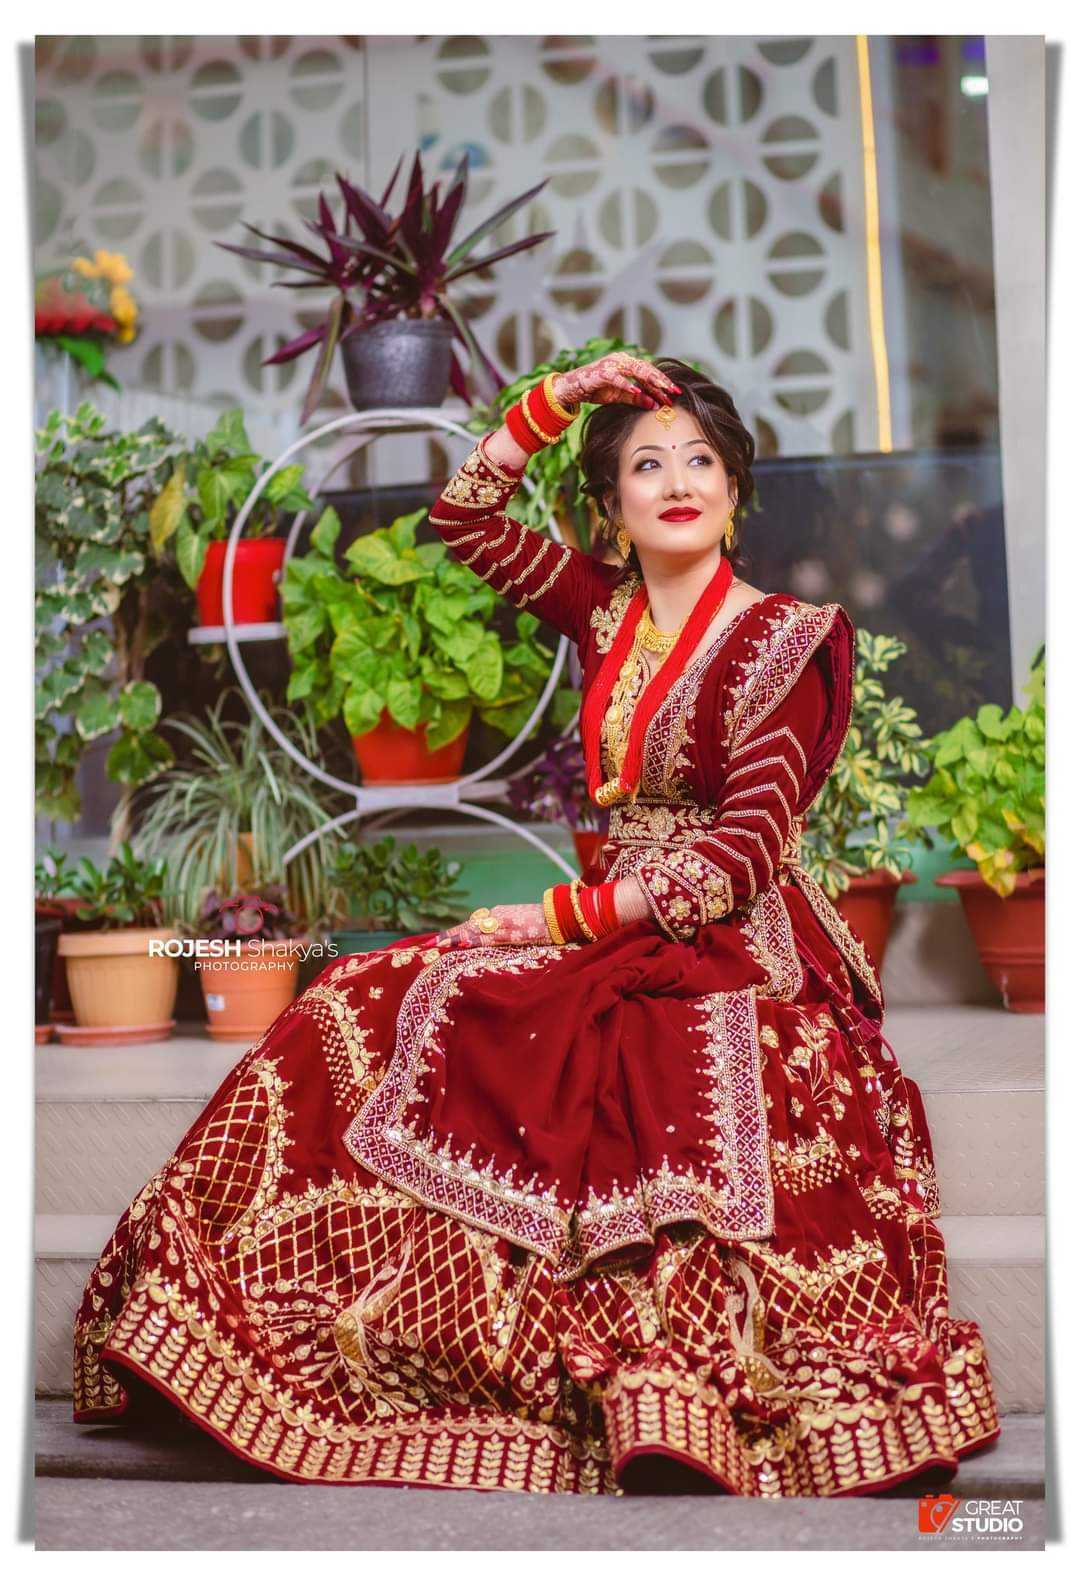 Traditional Nepali Cultural And Wedding Dress Trend In Nepal